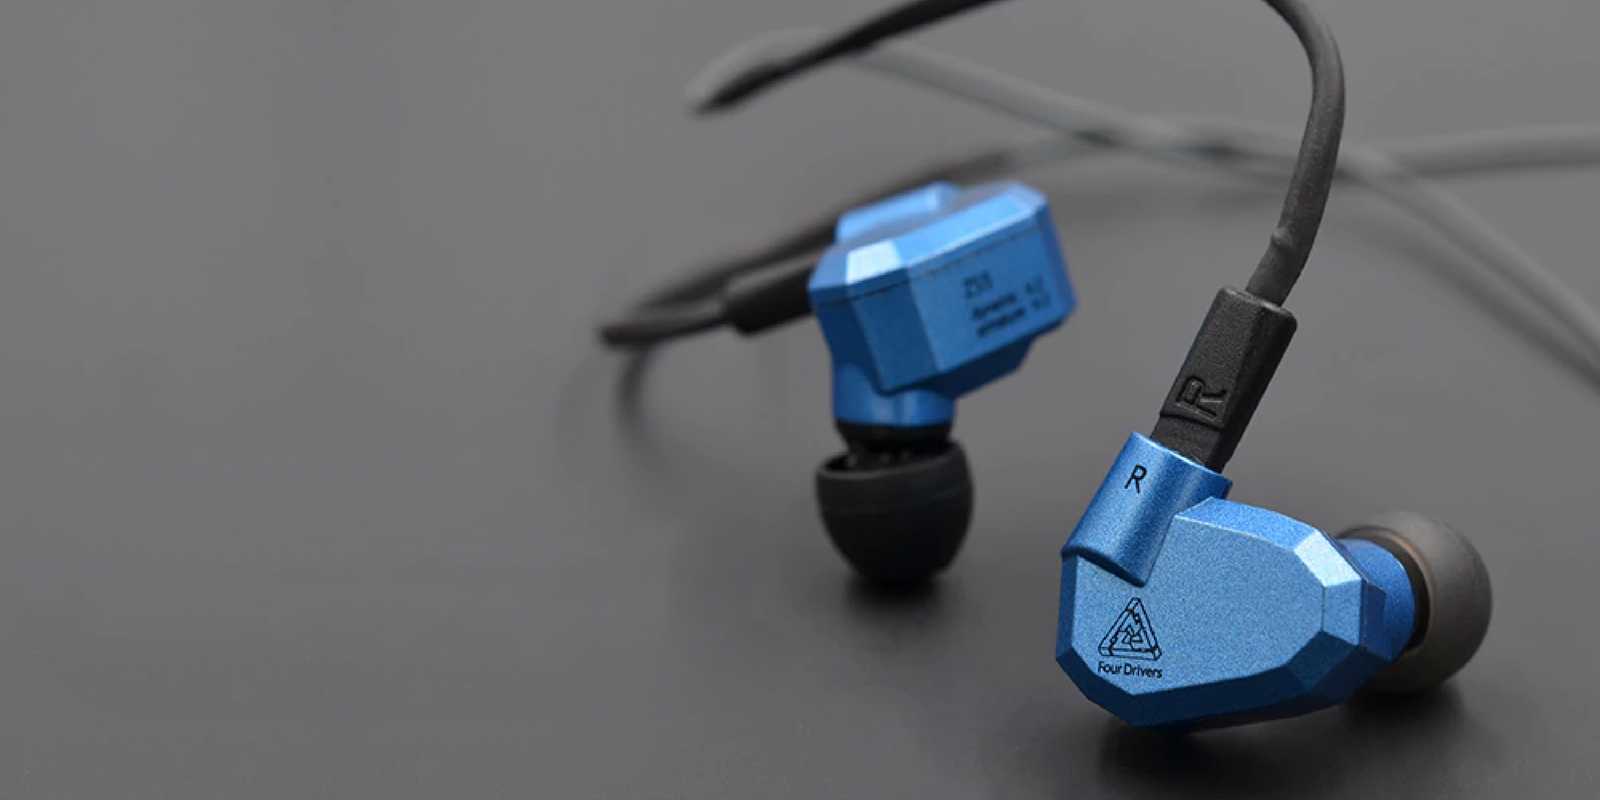 Kz zs5 - review | thephonograph.net